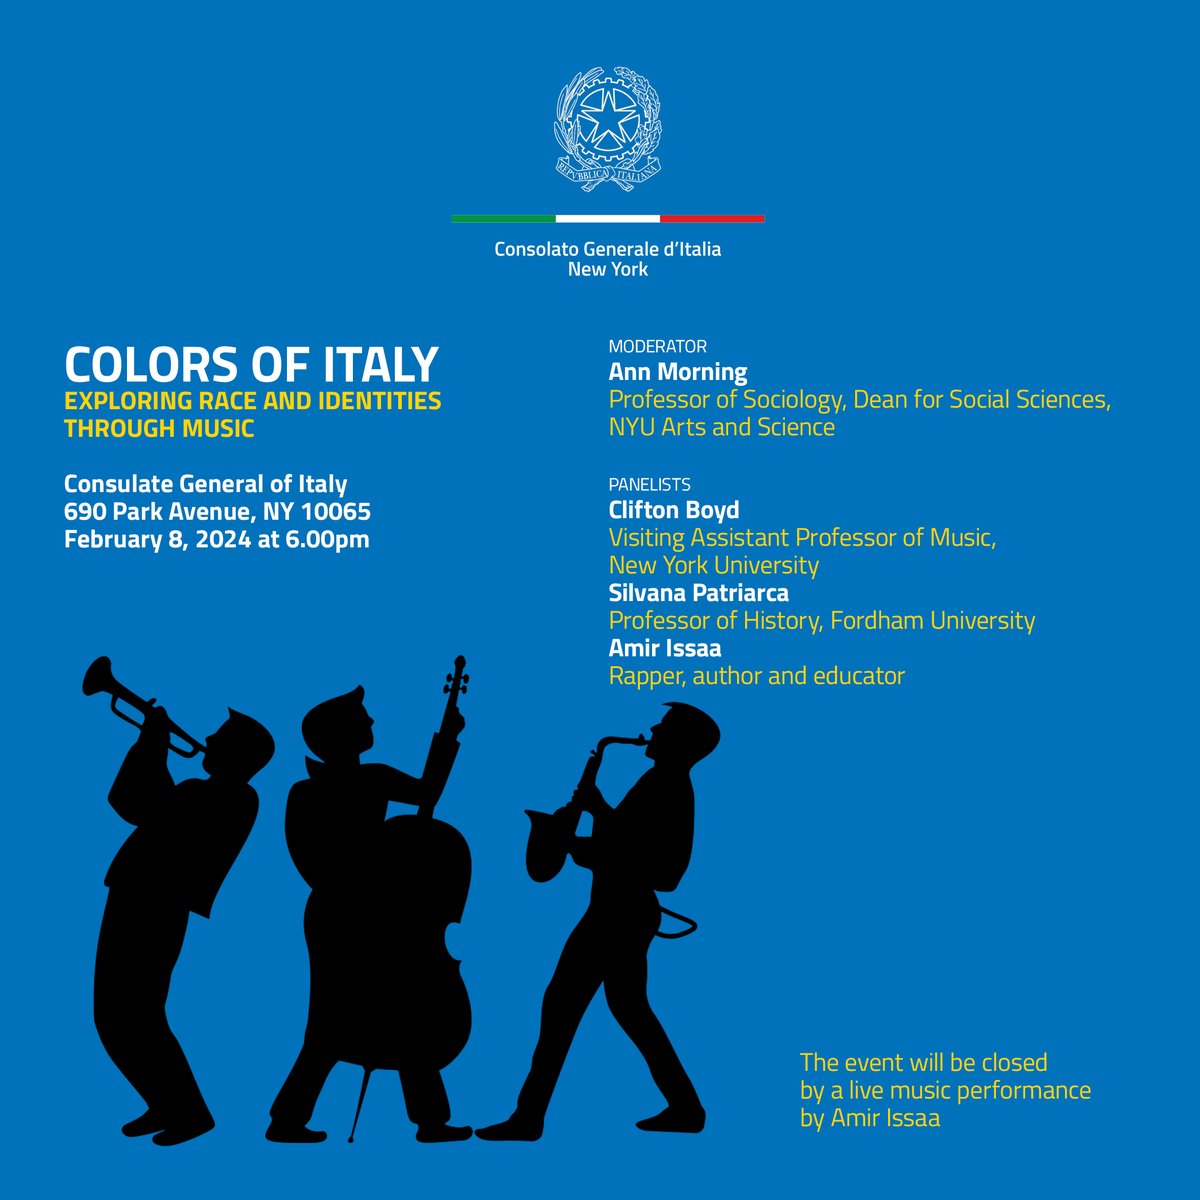 Safe to say this will be my first time on stage with a rapper! Check out 'Colors of Italy: Exploring Race and Identities Through Music' on Feb 8 at the Italian Consulate General in NY, performance by Amir Issaa. To register: fienta.com/colors-of-ital…